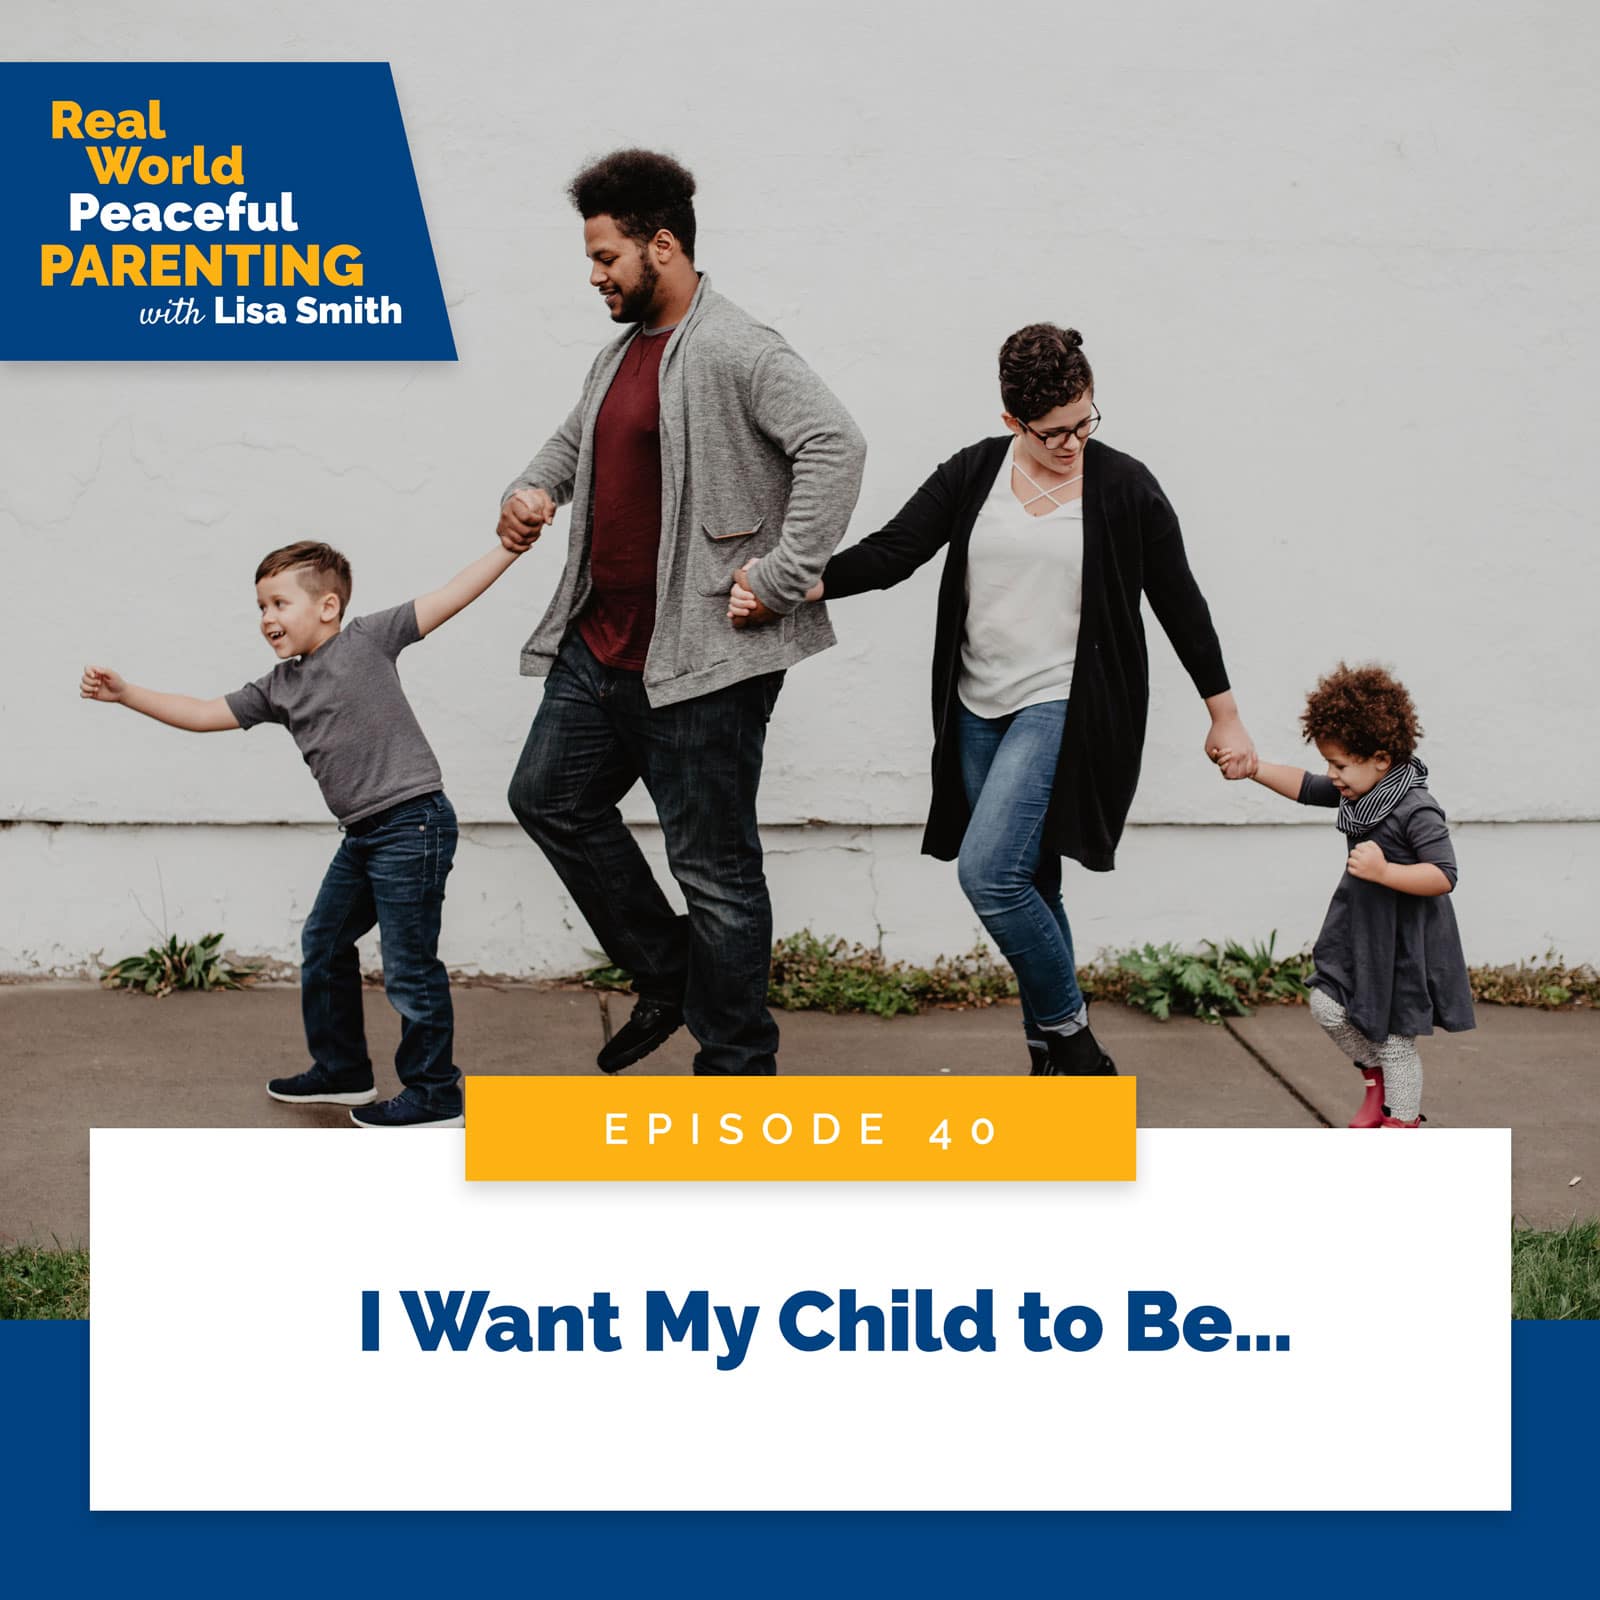 Real World Peaceful Parenting with Lisa Smith | I Want My Child to Be…